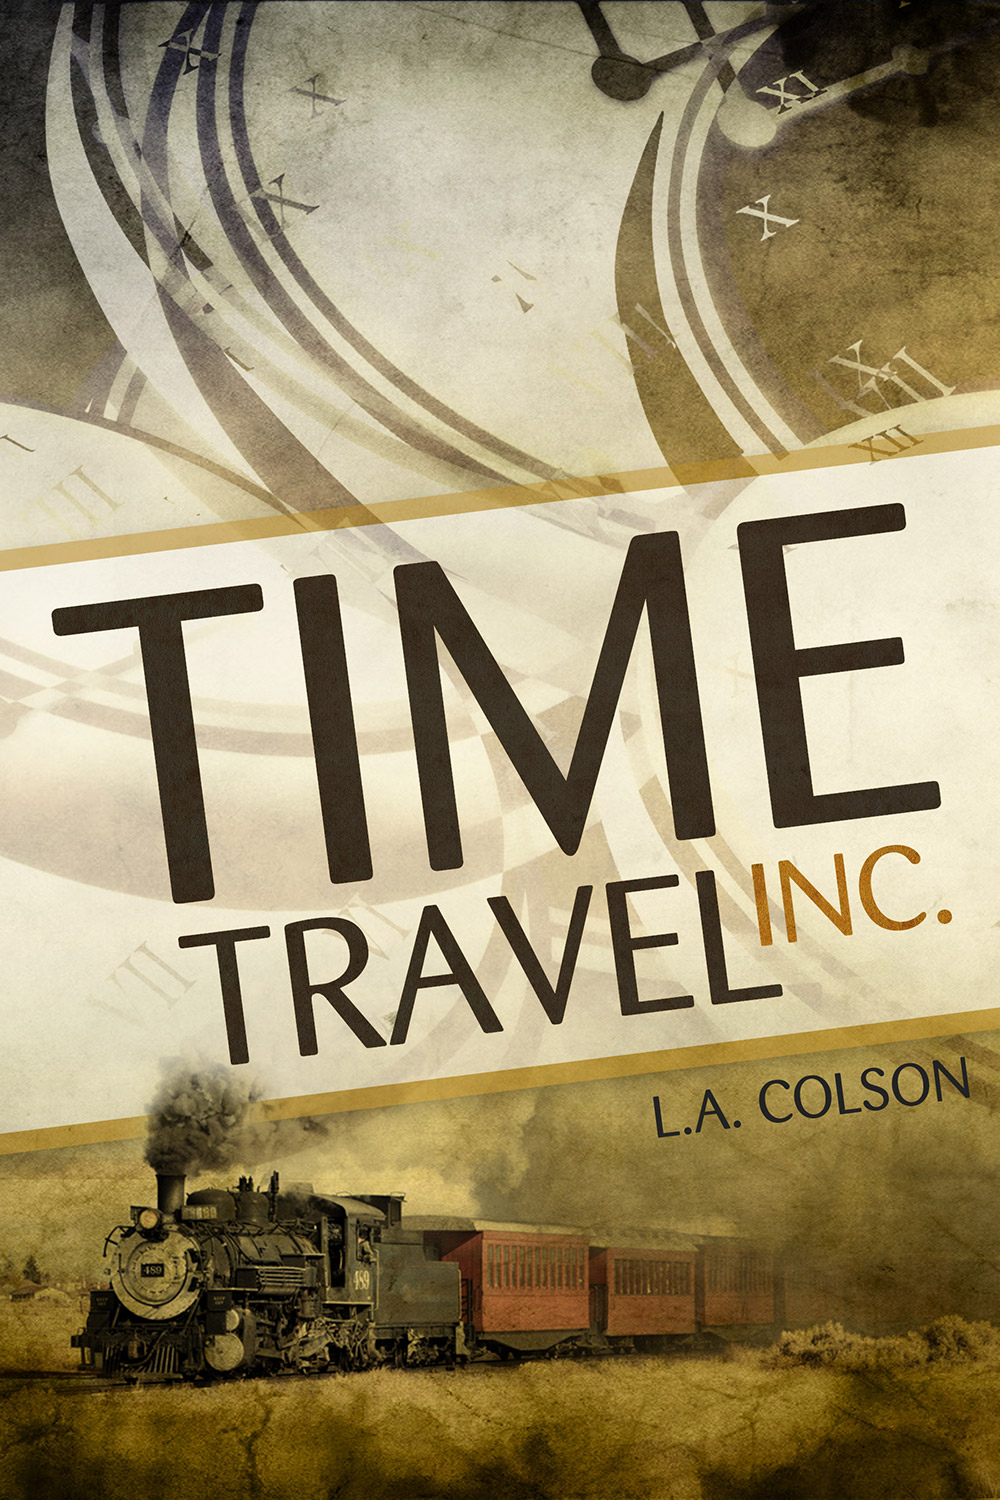 Time Travel Inc.